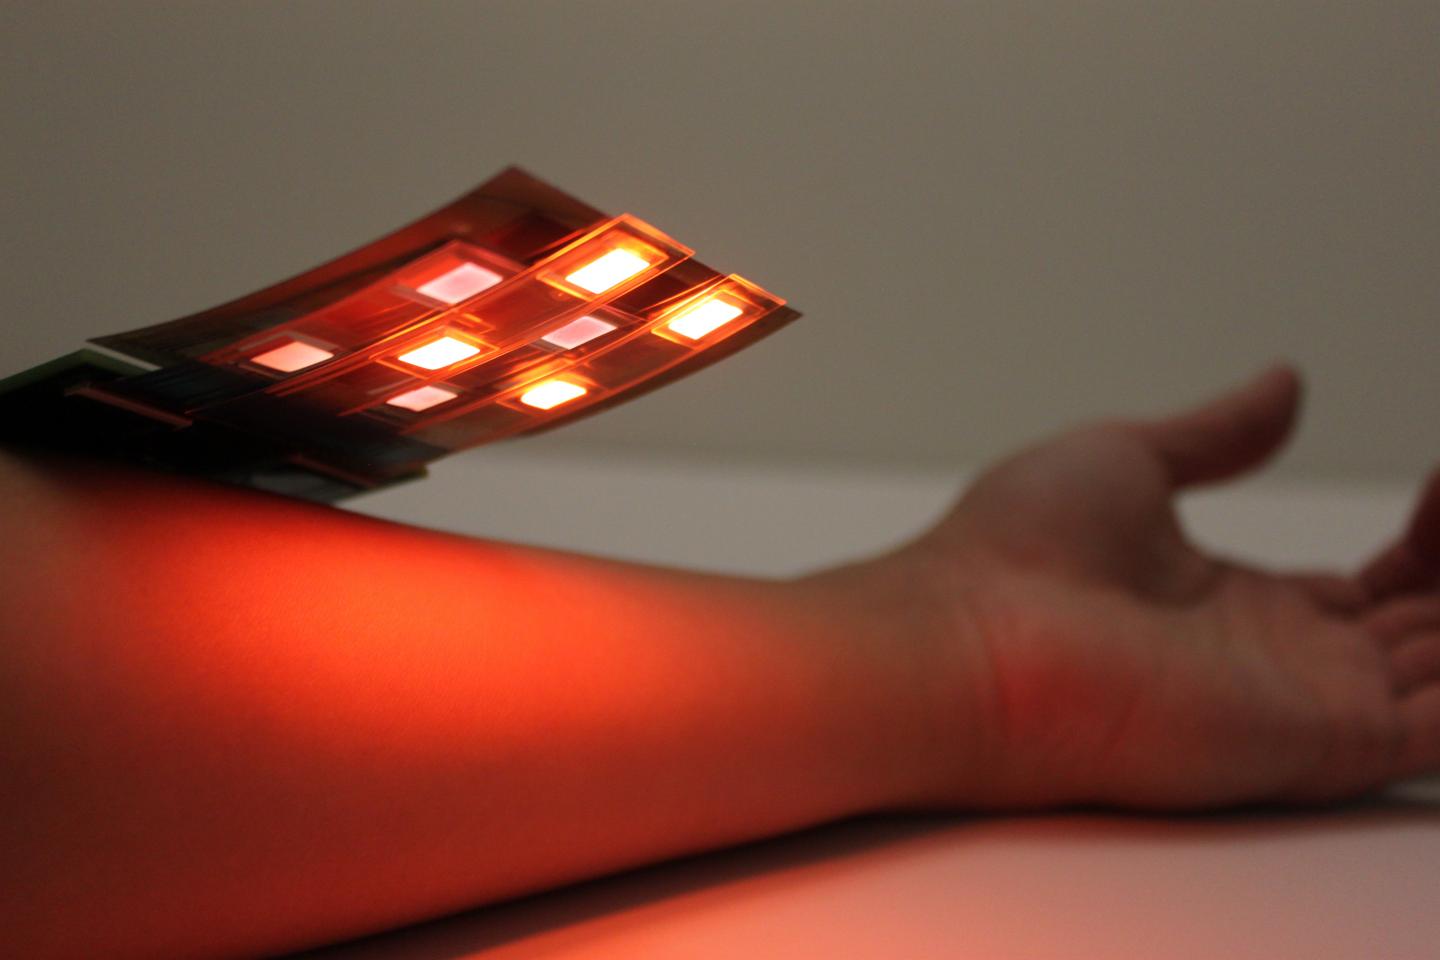 A new sensor made of an alternating array of printed LEDs and photodetectors can detect blood-oxygen levels anywhere in the body. The sensor shines red and infrared light into the skin and detects the ratio of light that is reflected back. Source: Yasser Khan, Arias Research Group, UC Berkeley